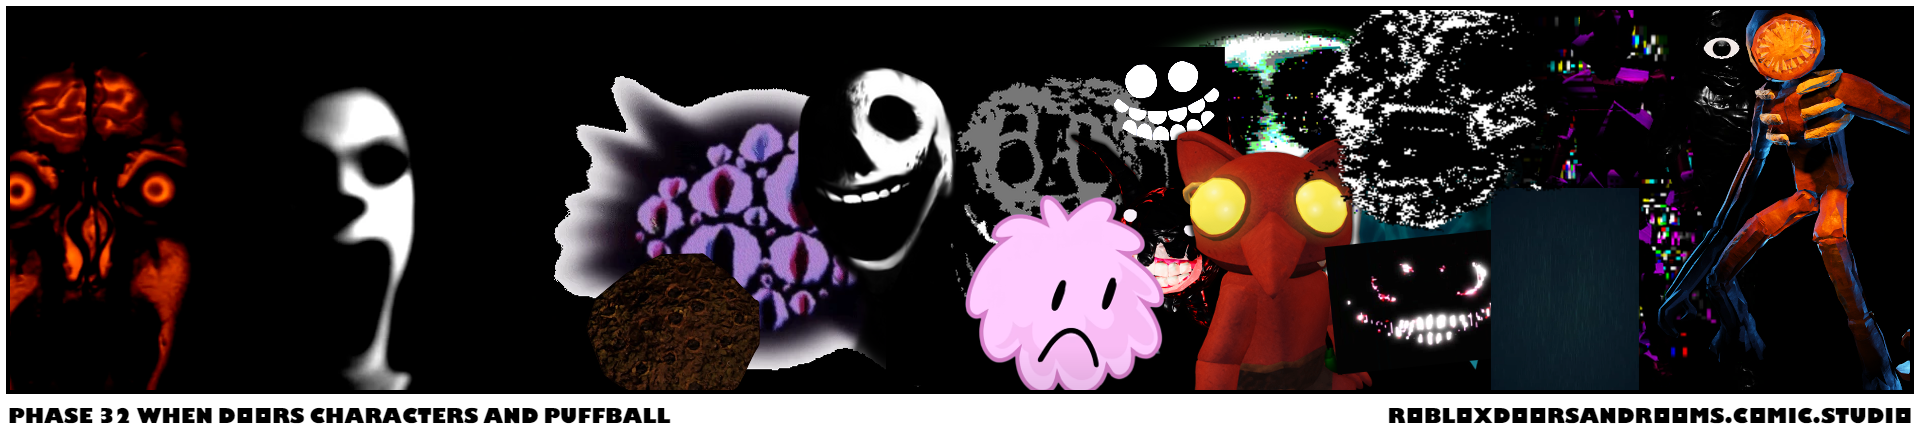 Phase 32 when Doors Characters and Puffball